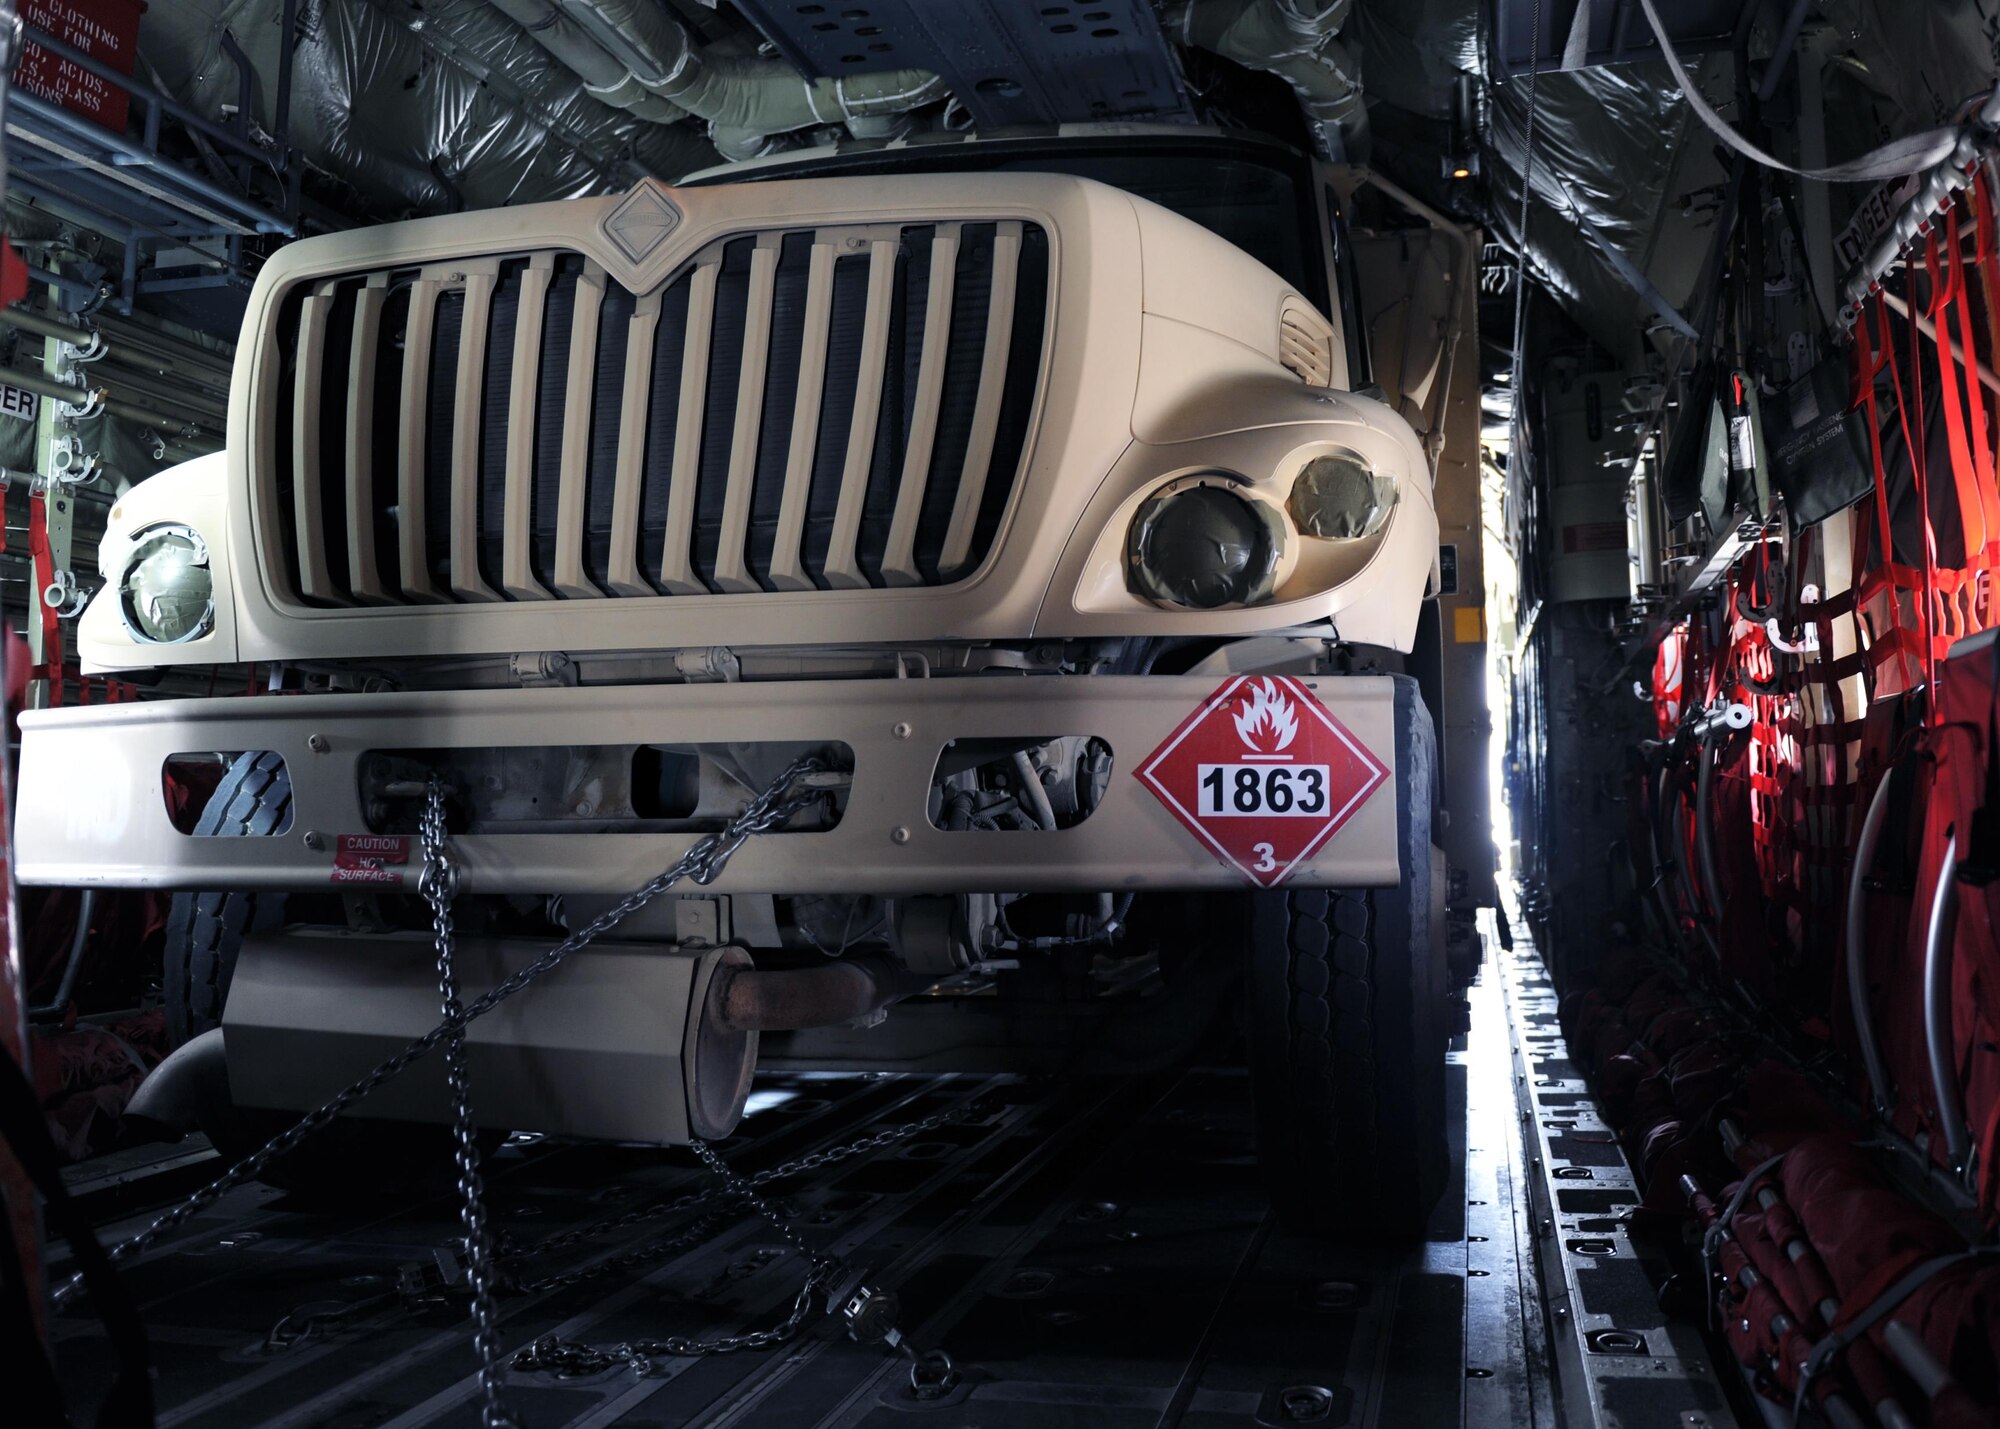 An R-11 fuel truck occupies the cargo compartment of a C-130J Super Hercules aircraft during a redeployment mission at an undisclosed location in the Air Force Central Command area of responsibility March 15, 2015. The ability to forward deploy mission critical equipment, such as the R-11, to key sites throughout the AOR is more imperative than ever before as the Air Force reduces its footprint in the region. (U.S. Air Force photo by Staff Sgt. Whitney Amstutz)